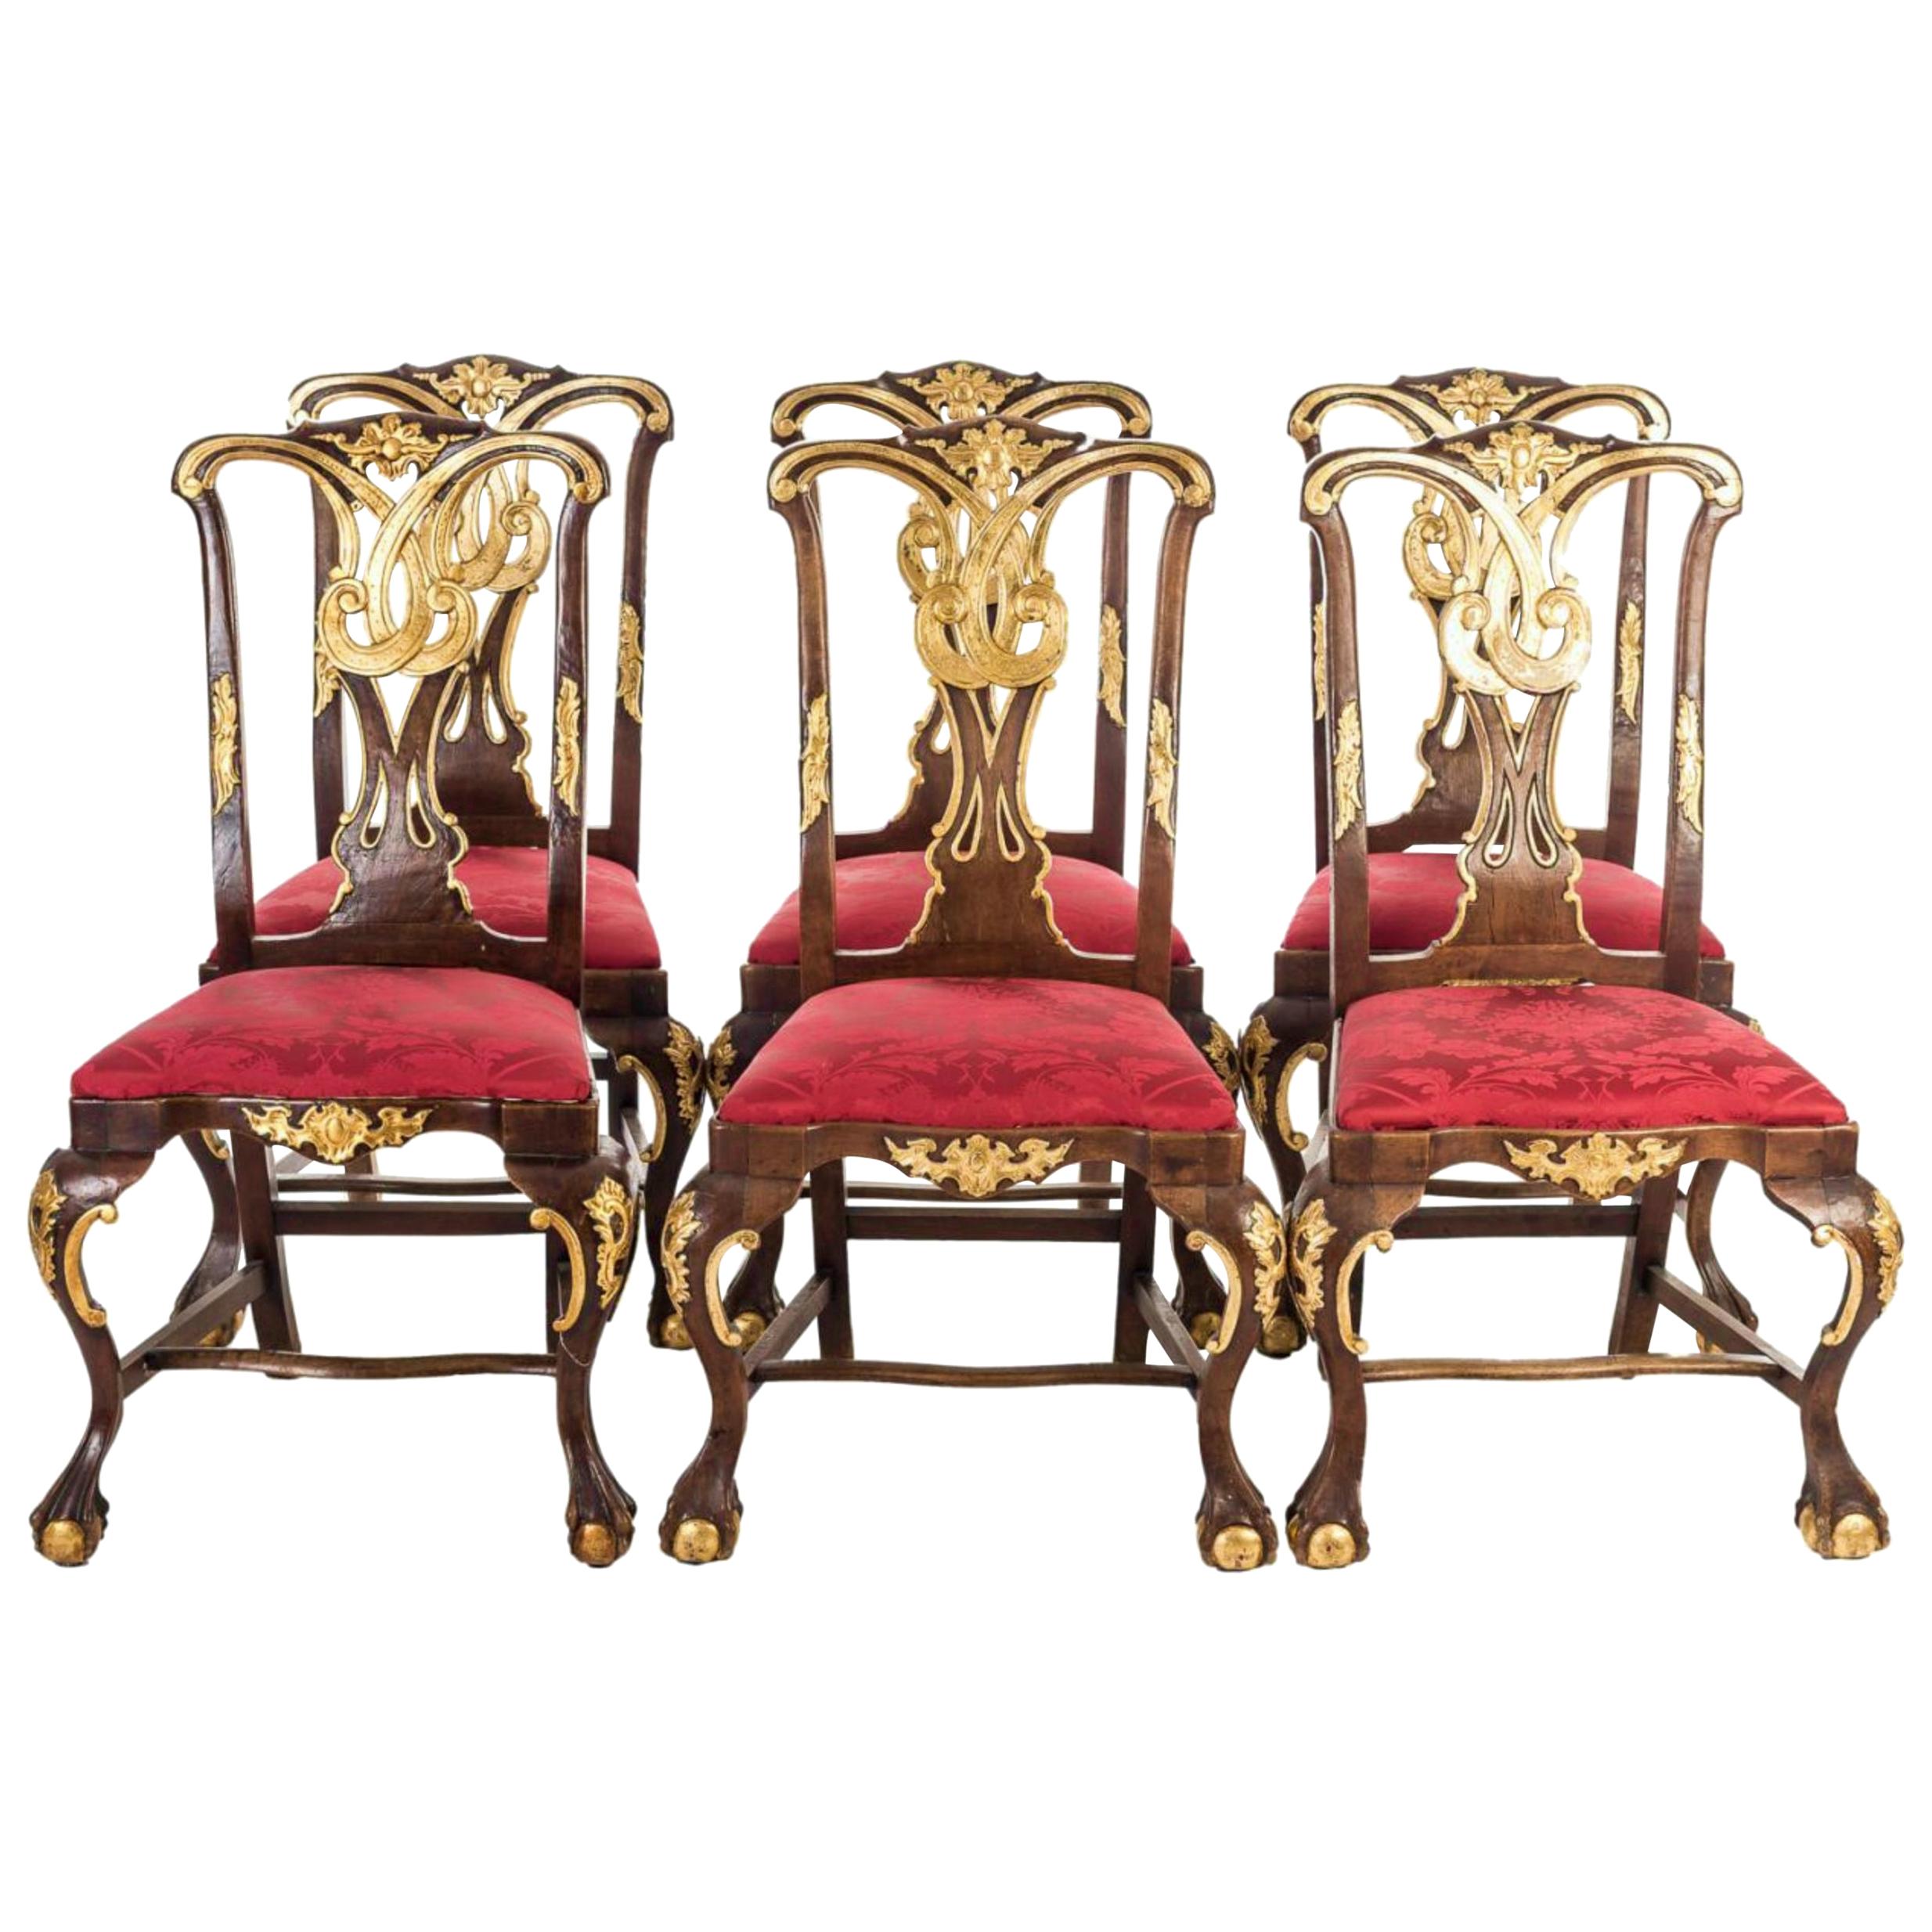 Chippendale Set, Sofa /2 Armchairs / 8 Chairs, 18th Century